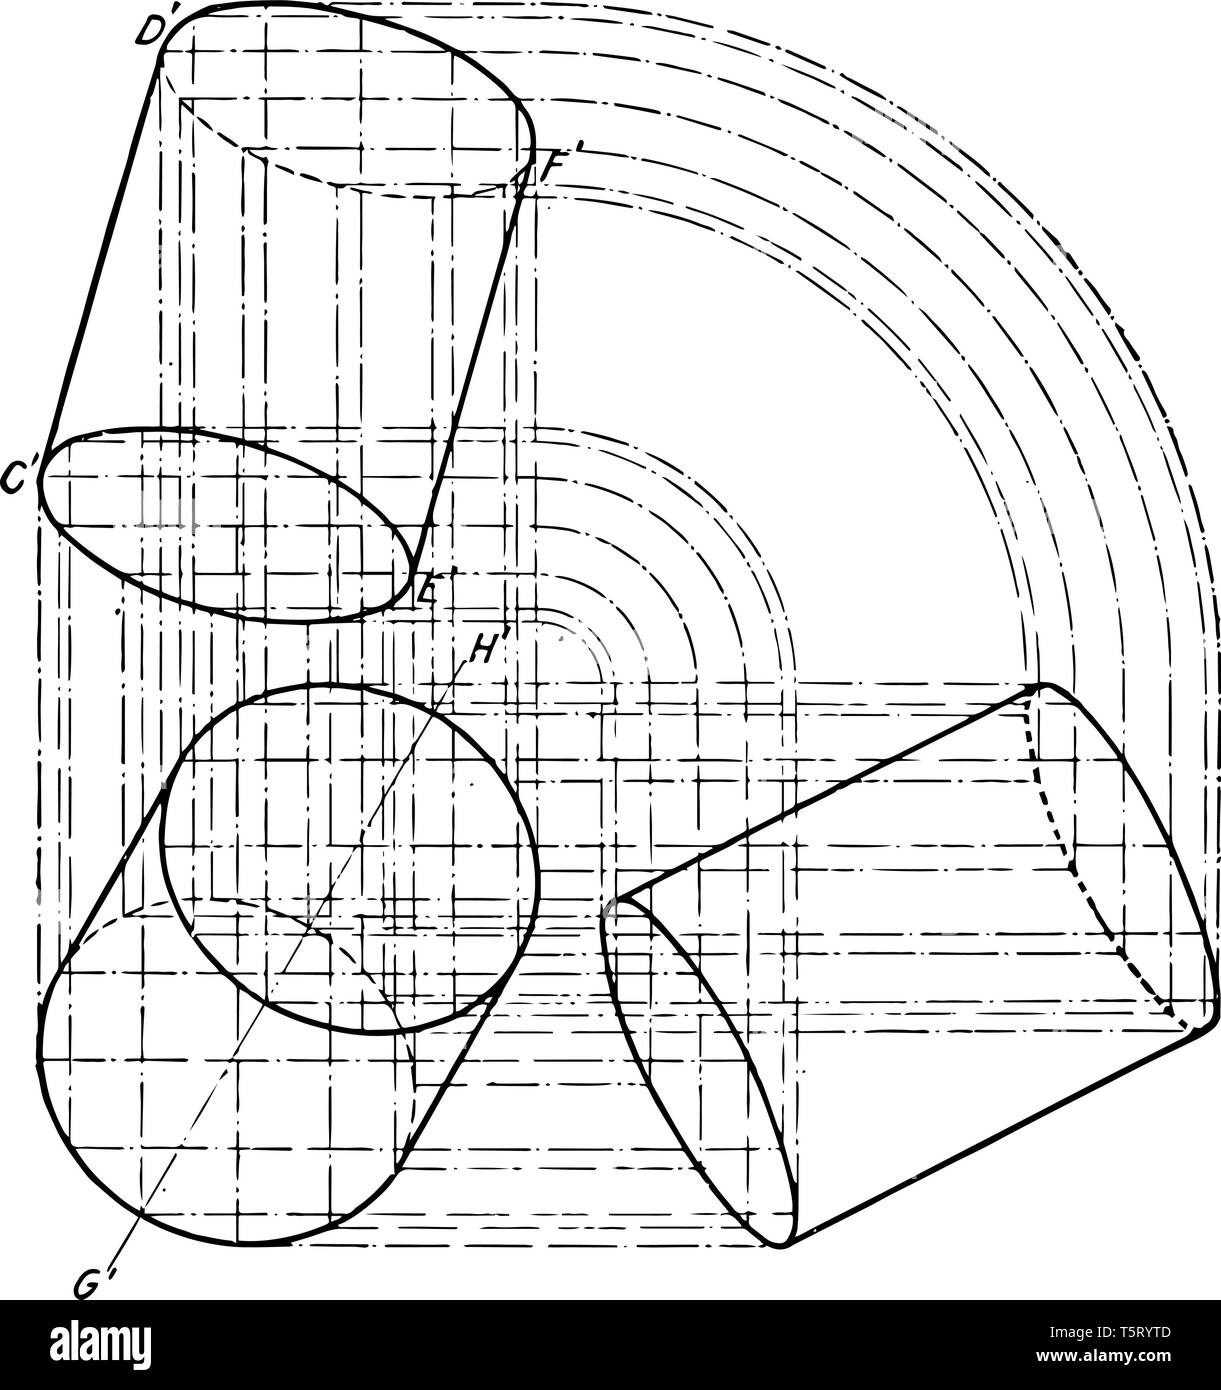 The image shows the three-axis plane Projection of the cylinder. It is a graphic layout of projections to build a cylinder from the base of the cylind Stock Vector